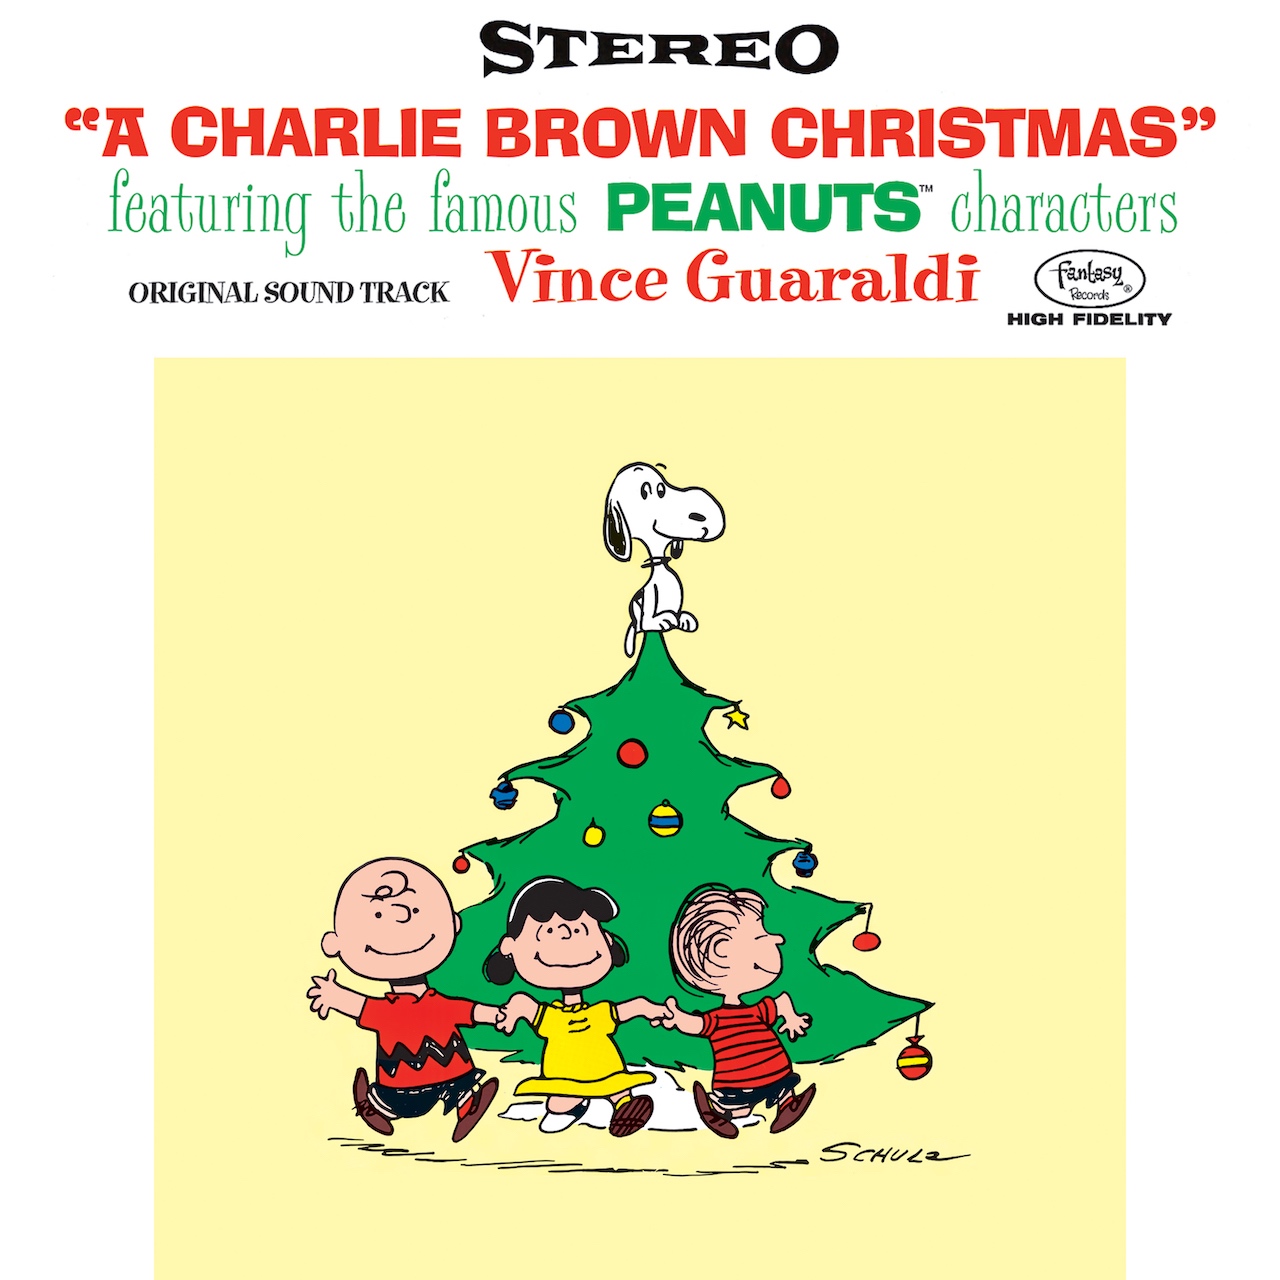 Definitive Edition Of 'A Charlie Brown Christmas' To Be Released